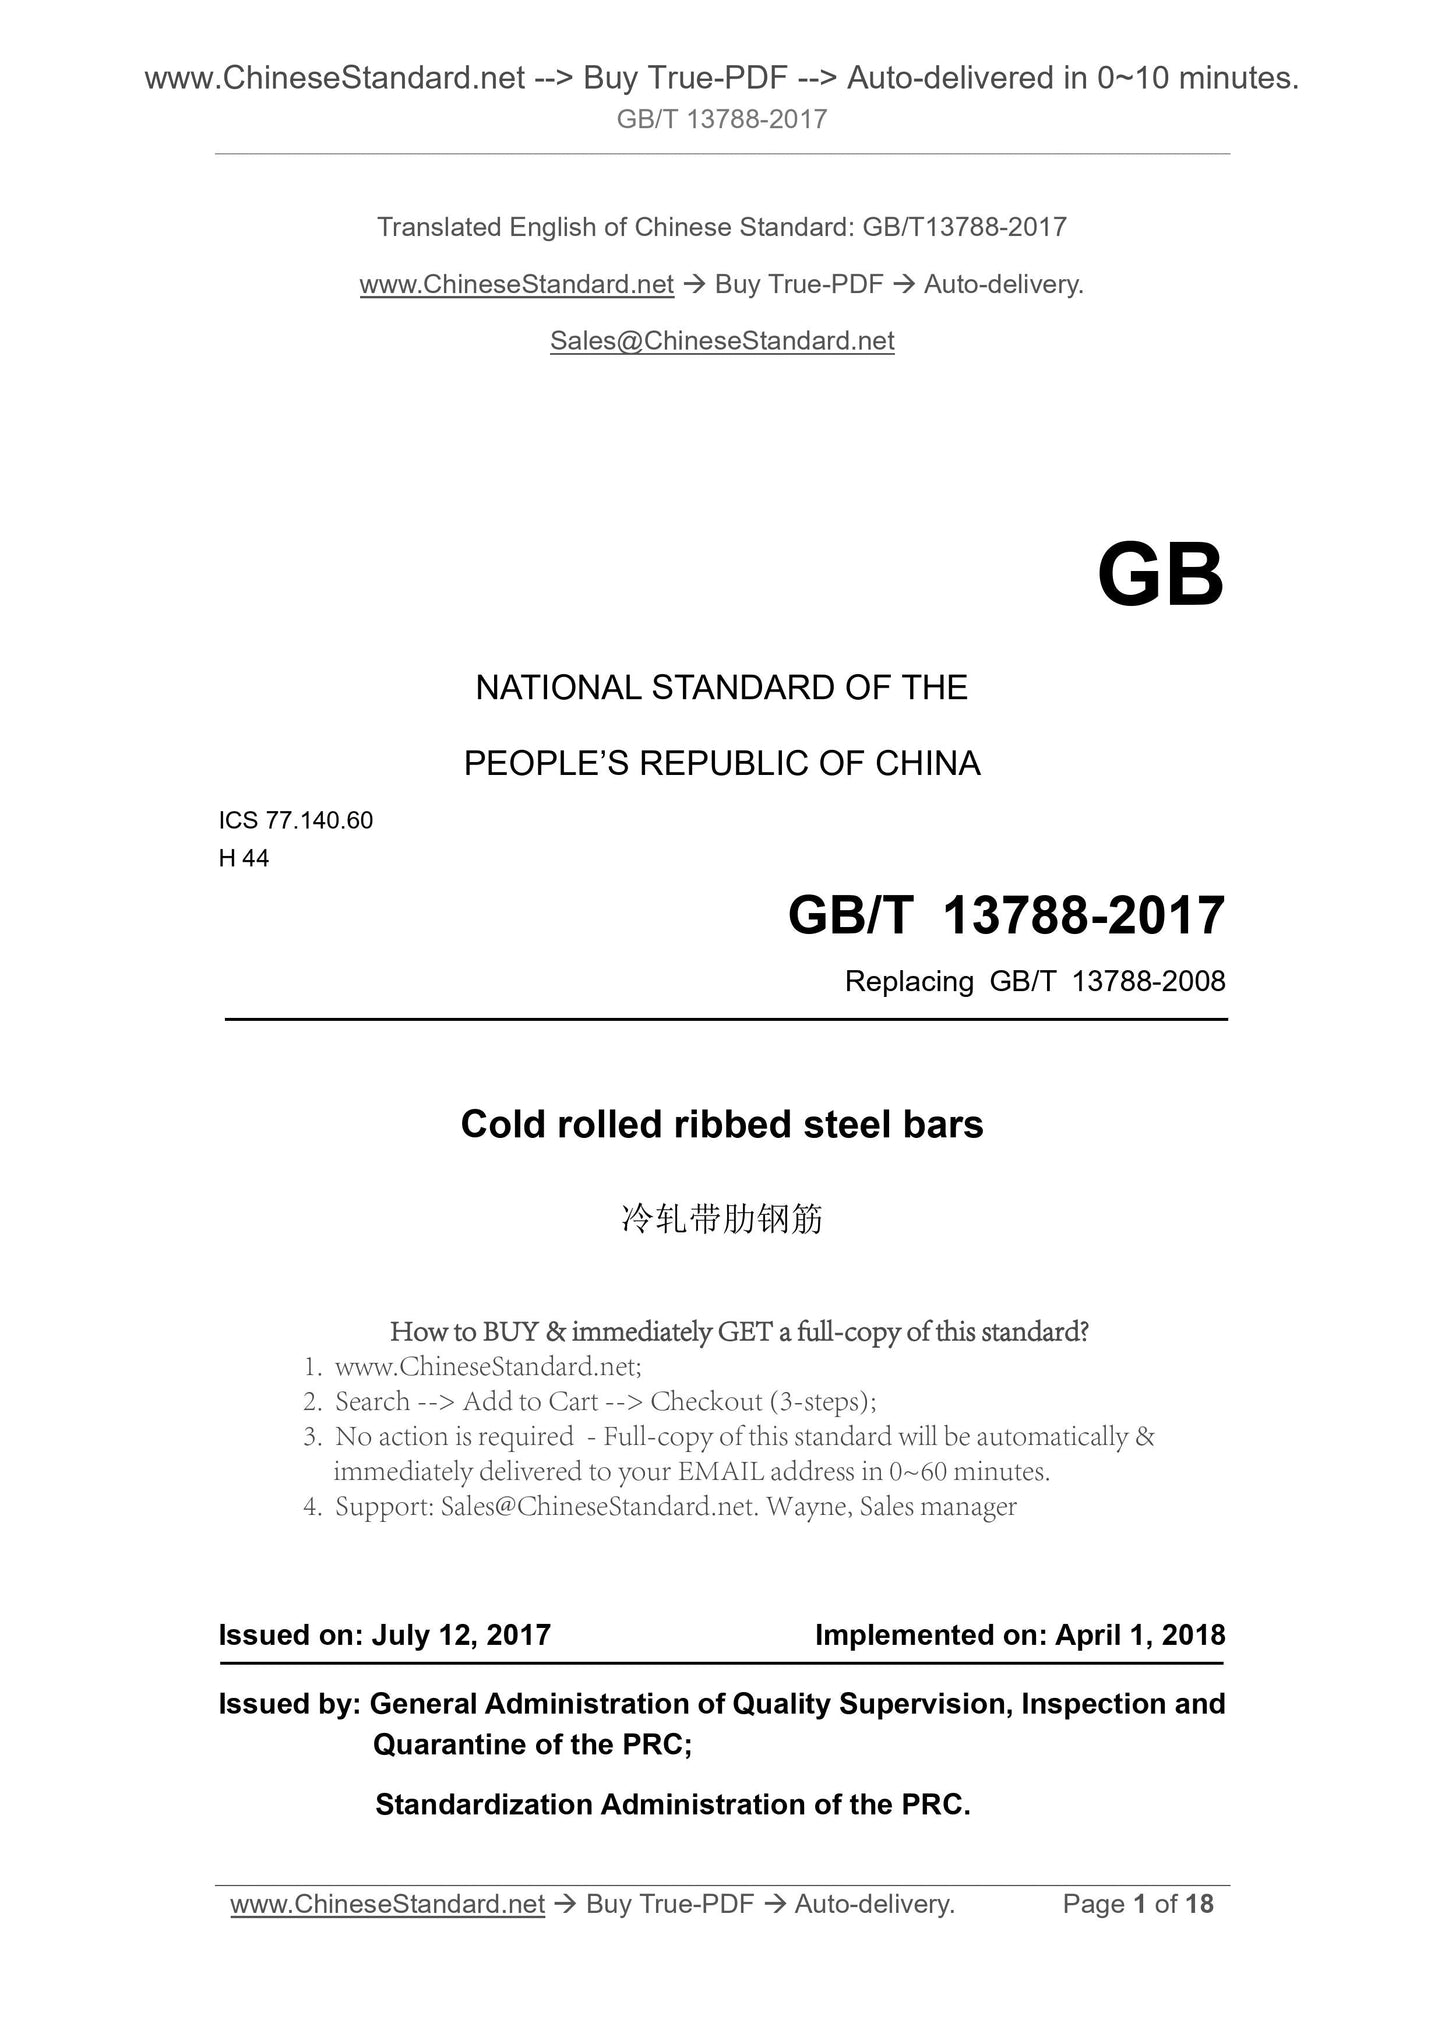 GB/T 13788-2017 Page 1